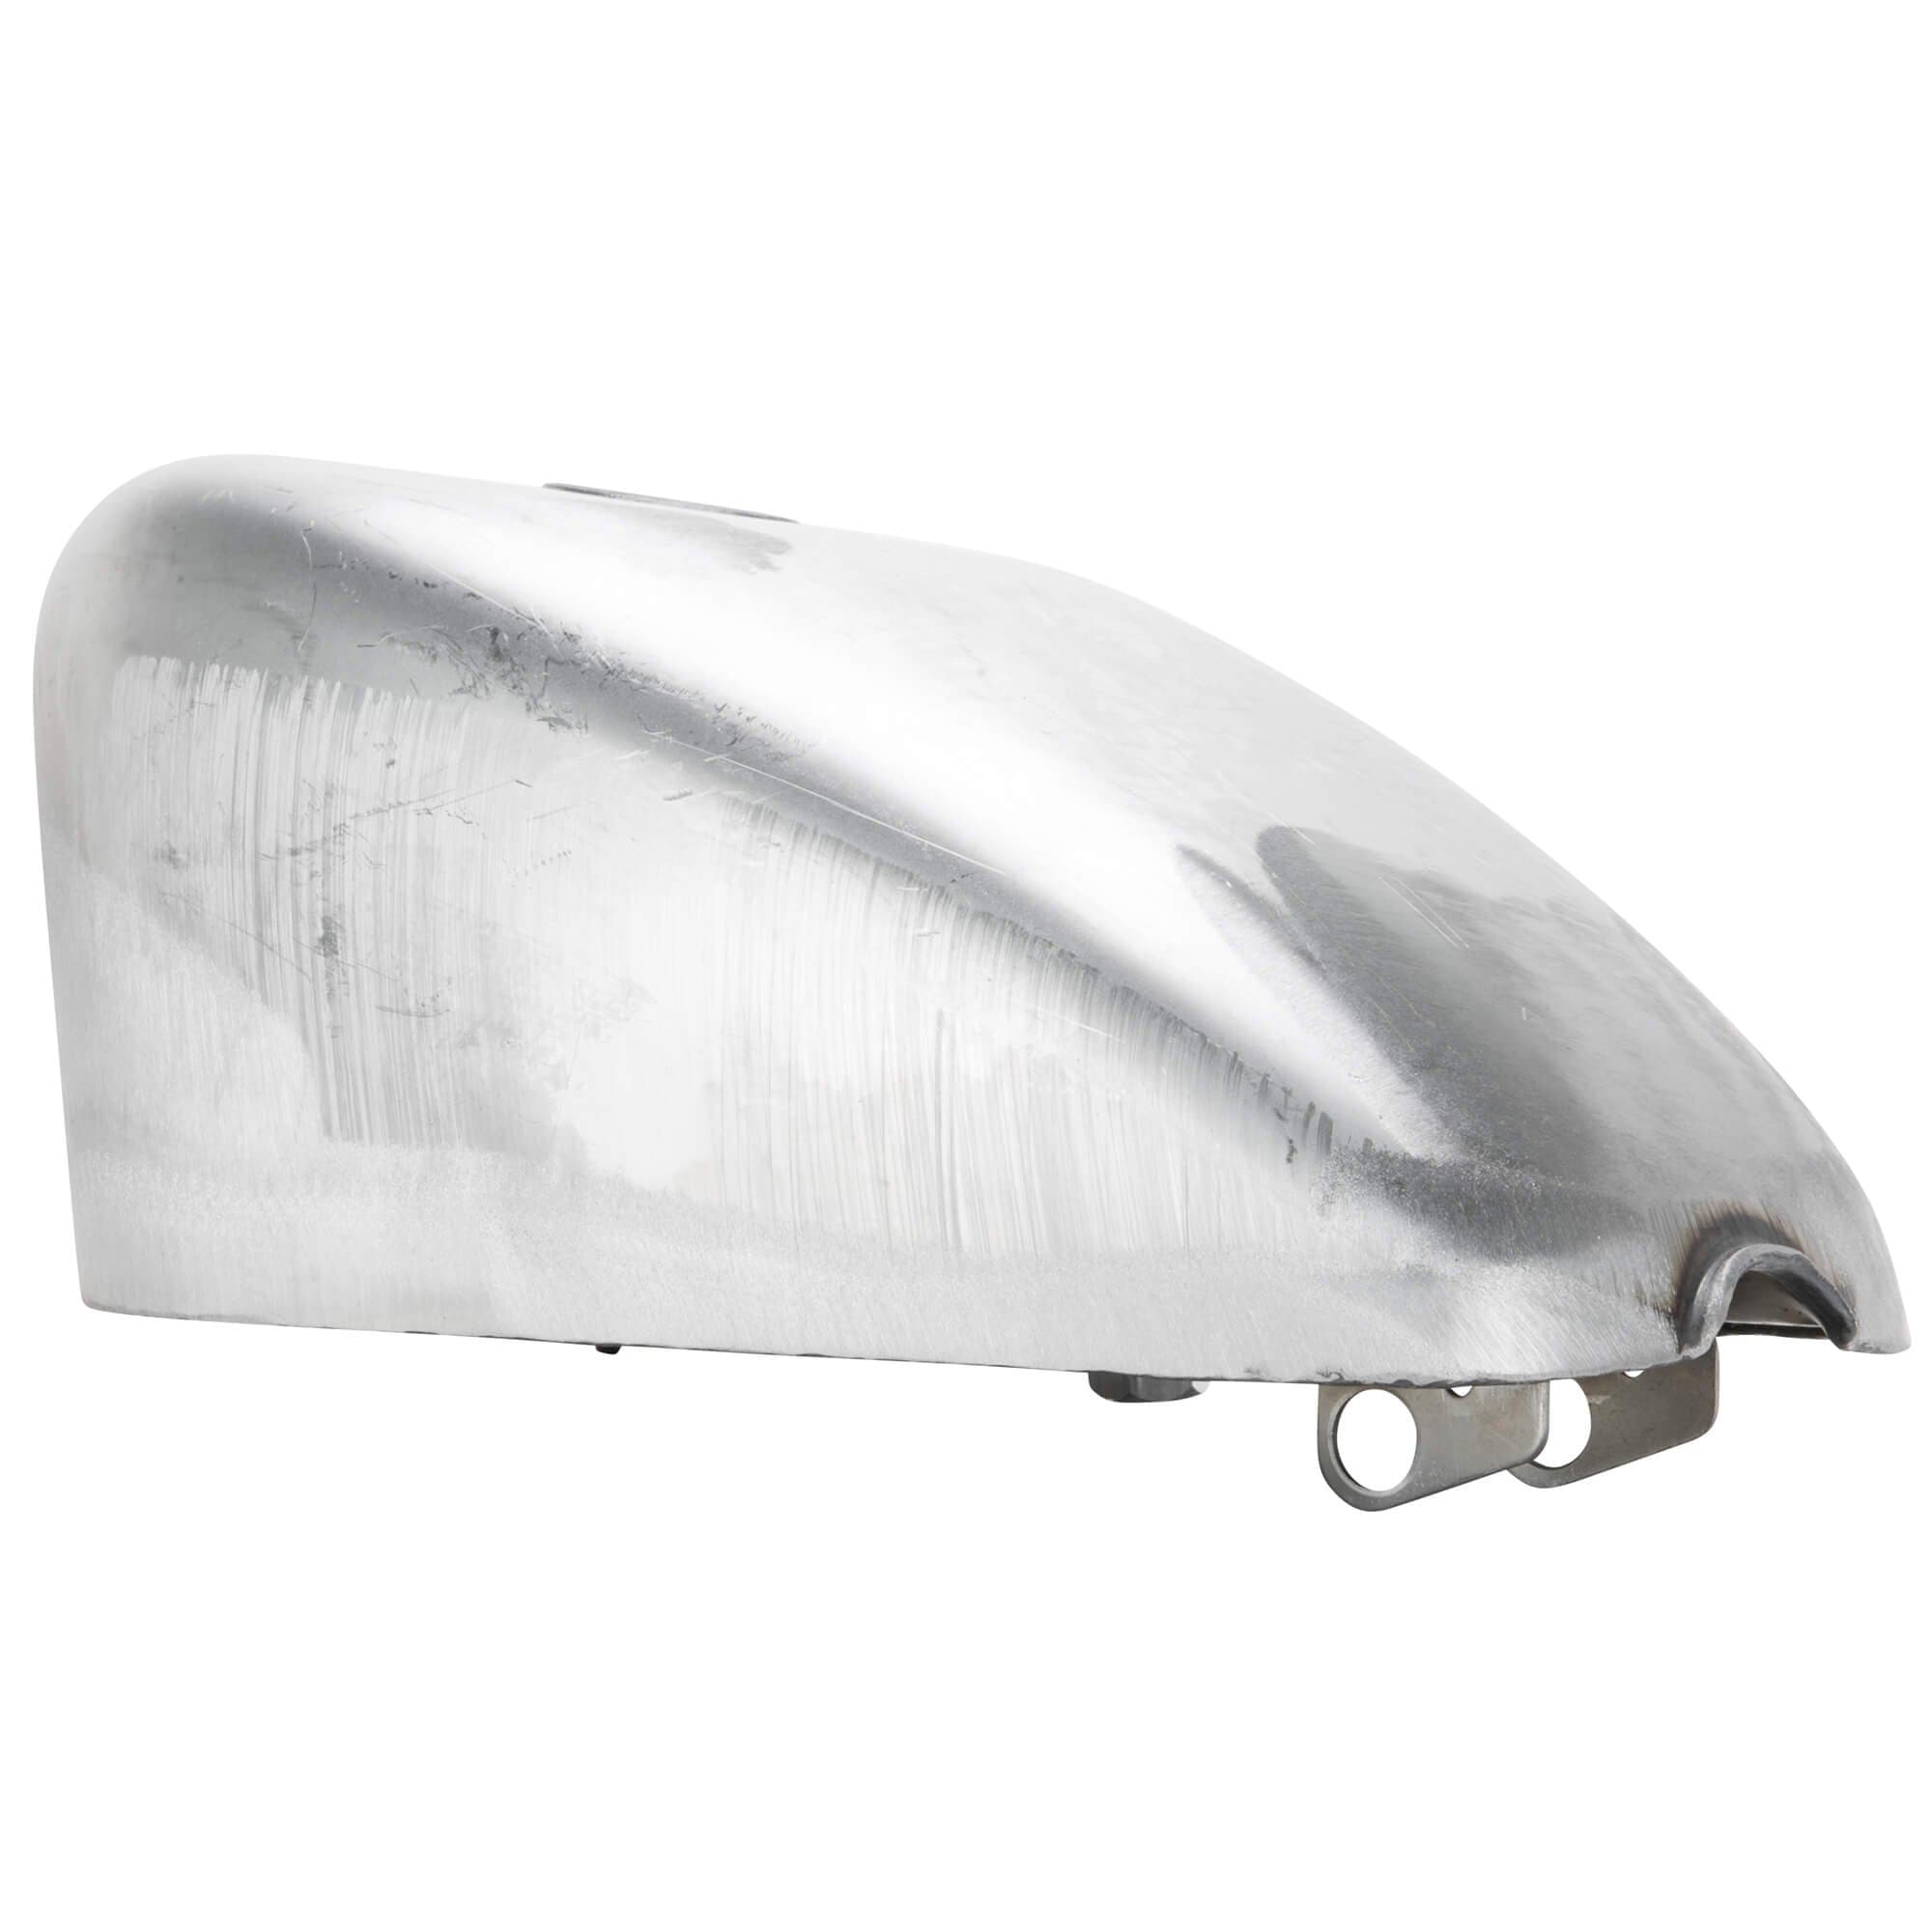 Cycle Standard Stock Style Harley King Sportster Gas Tank 1986 - 1994 - Right Side Petcock - 2.9 Gallon 008840